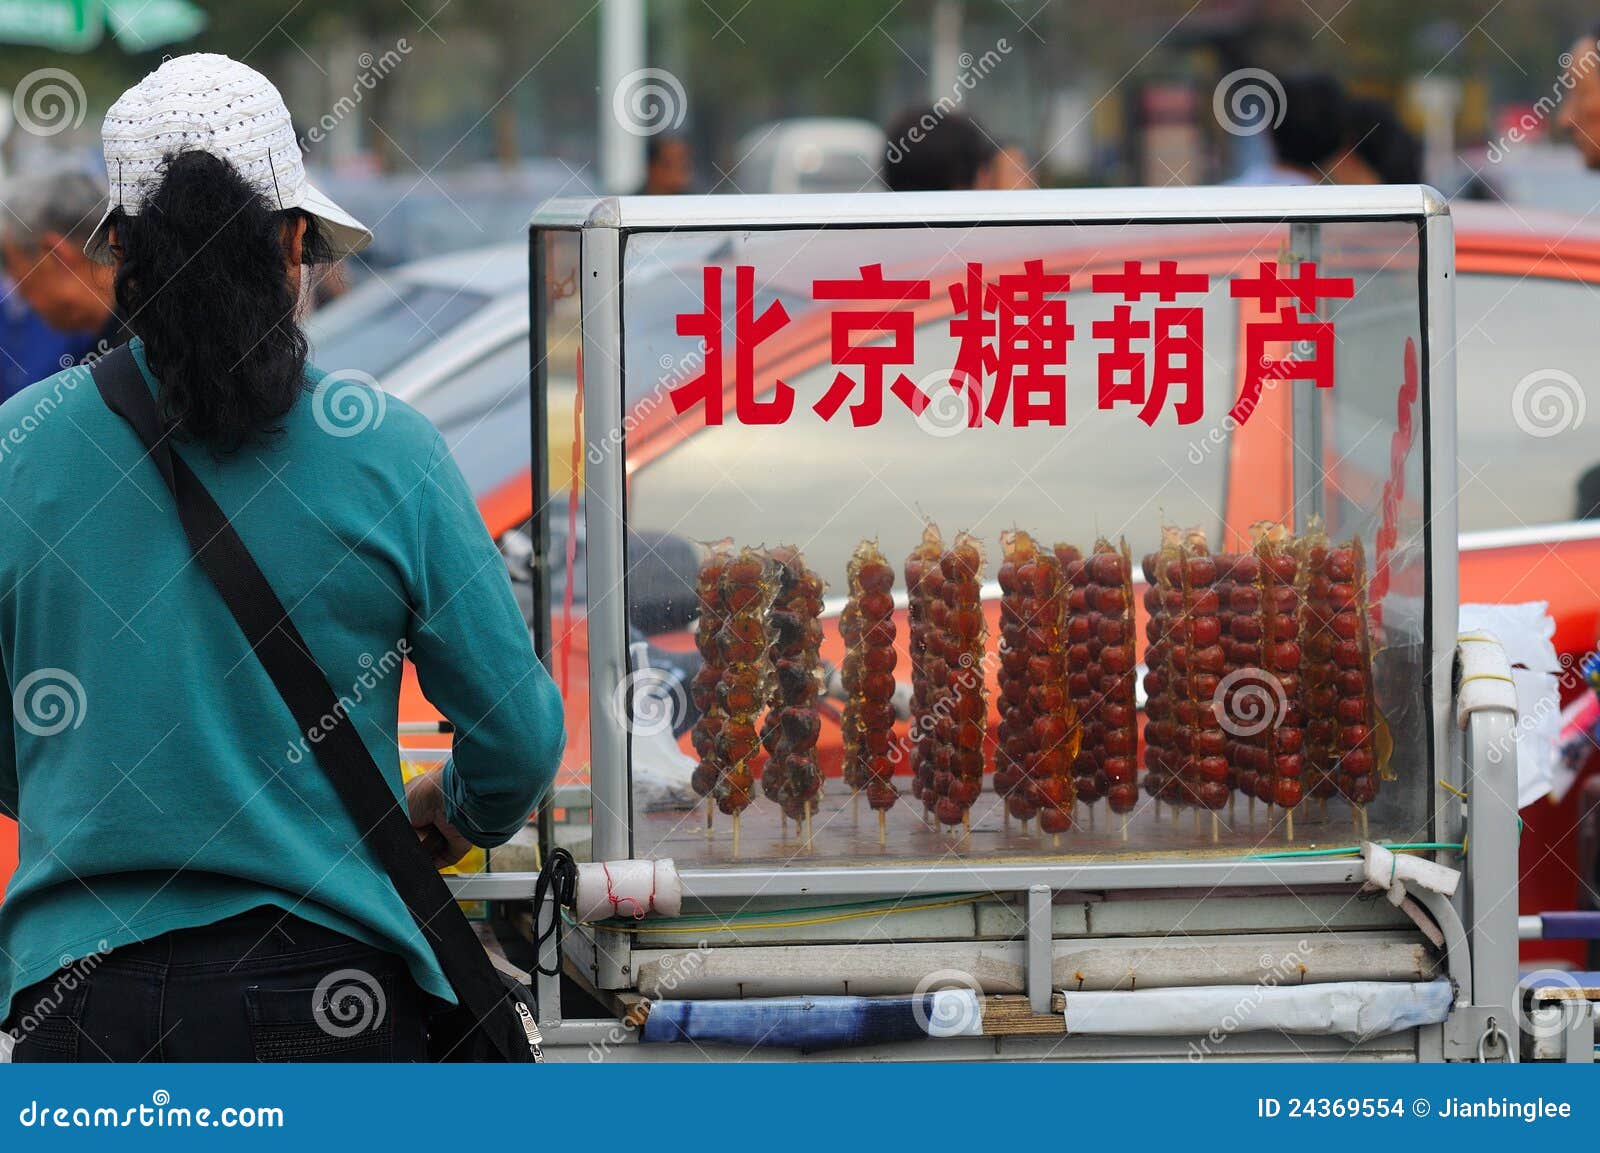 In the park, there are many small traders to do business.The picture shows a women sell BeiJing candied fruit.Xingtai City, Hebei Province, China, April 15, 2012.